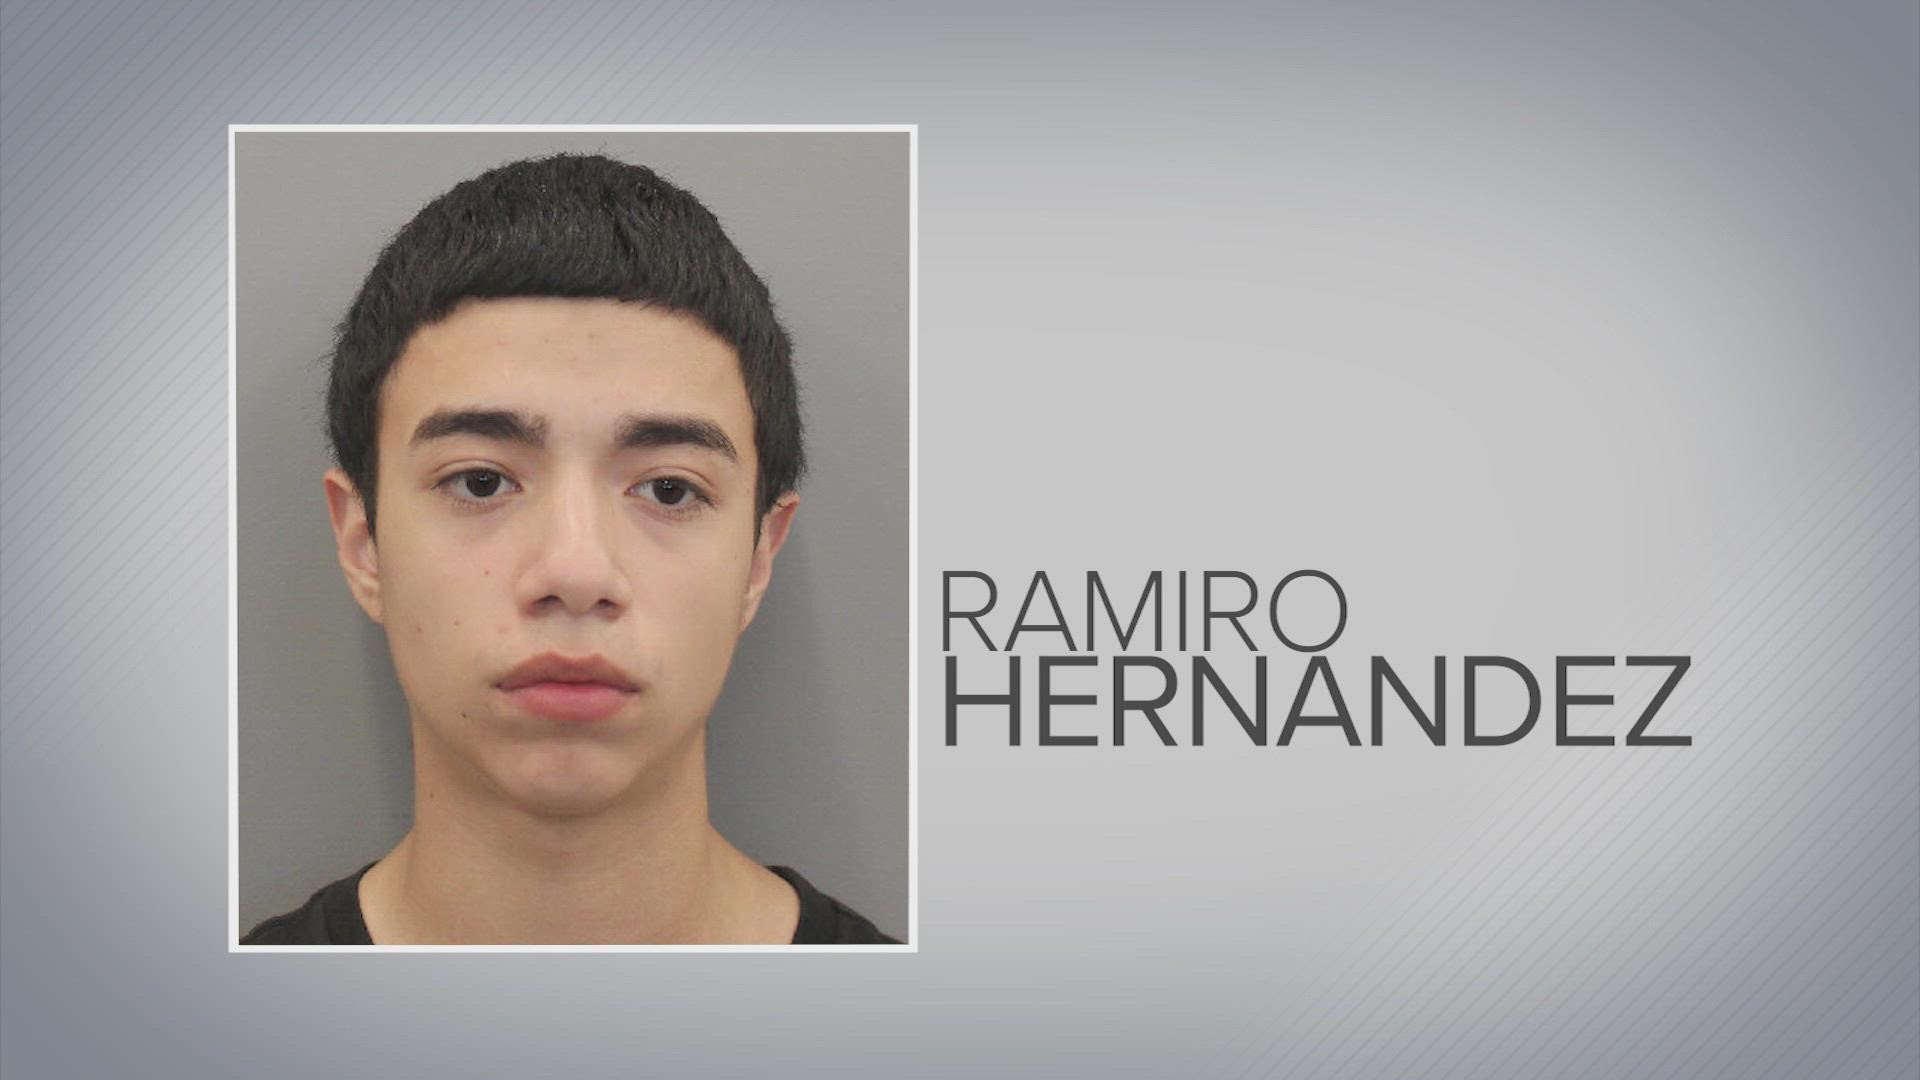 Seventeen-year-old Ramiro Hernandez is charged with capital murder in the west Houston shooting death of Axel Turcios, a Lamar High School student.